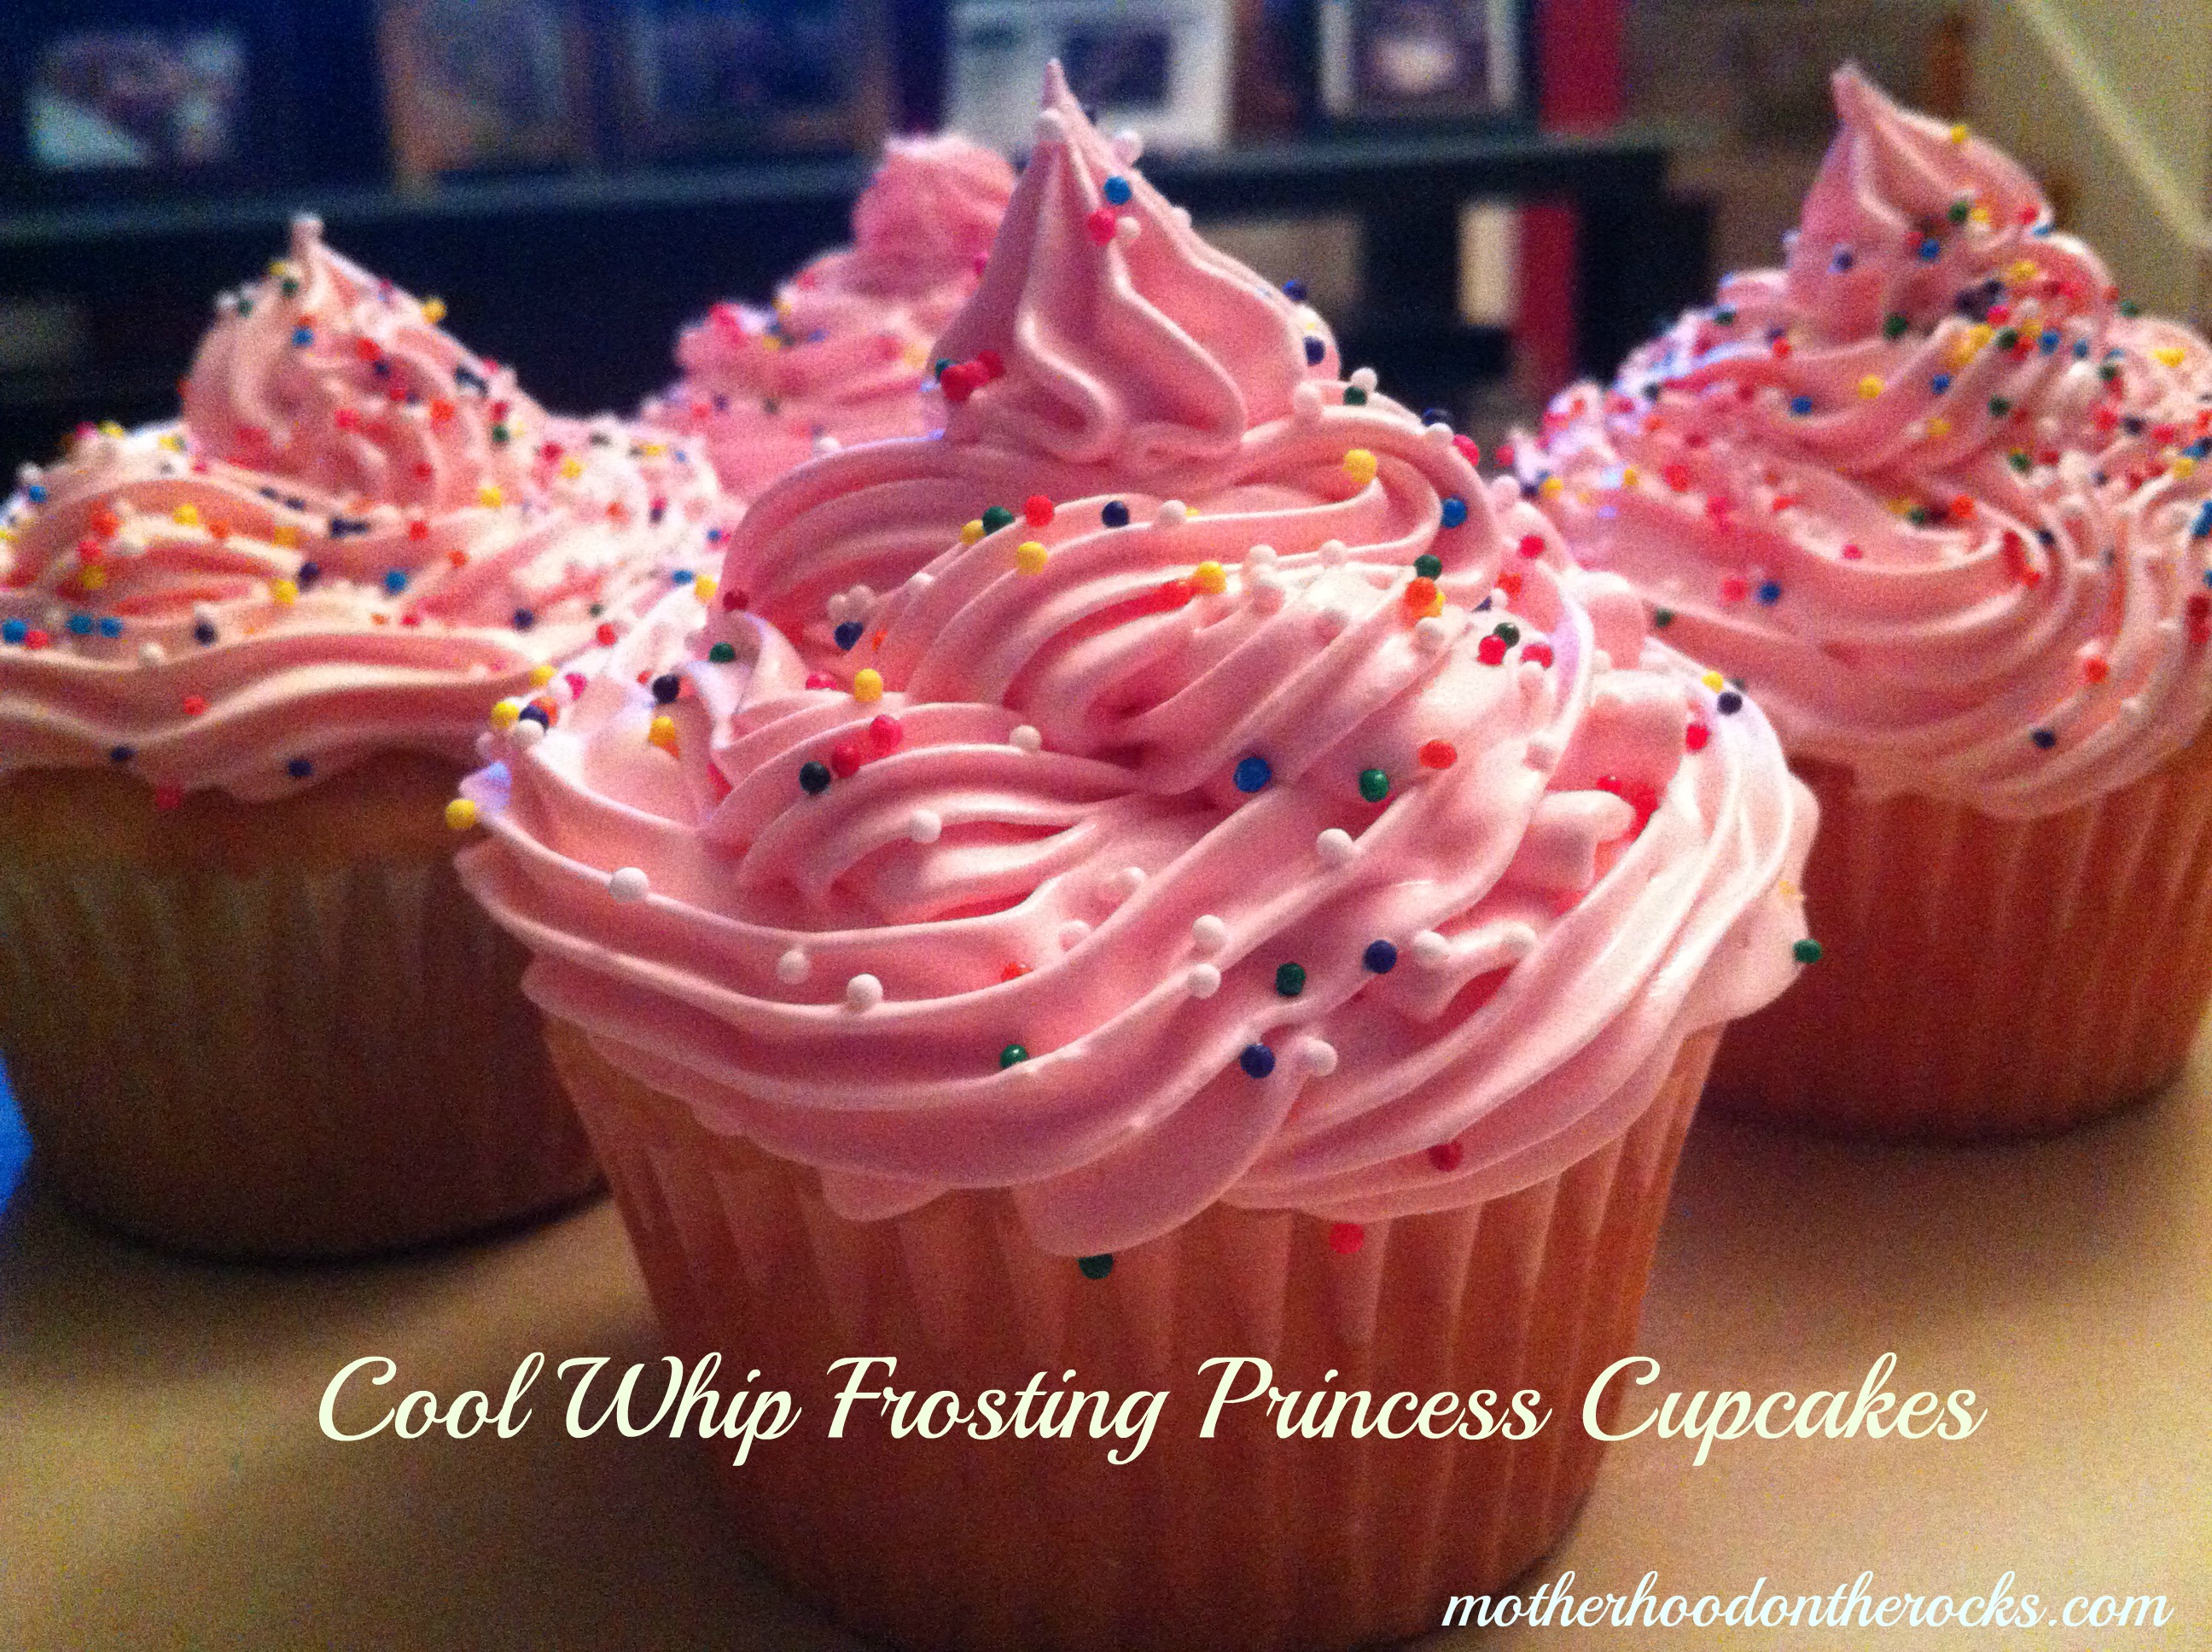 Cool Whip Frosting Princess Cupcakes